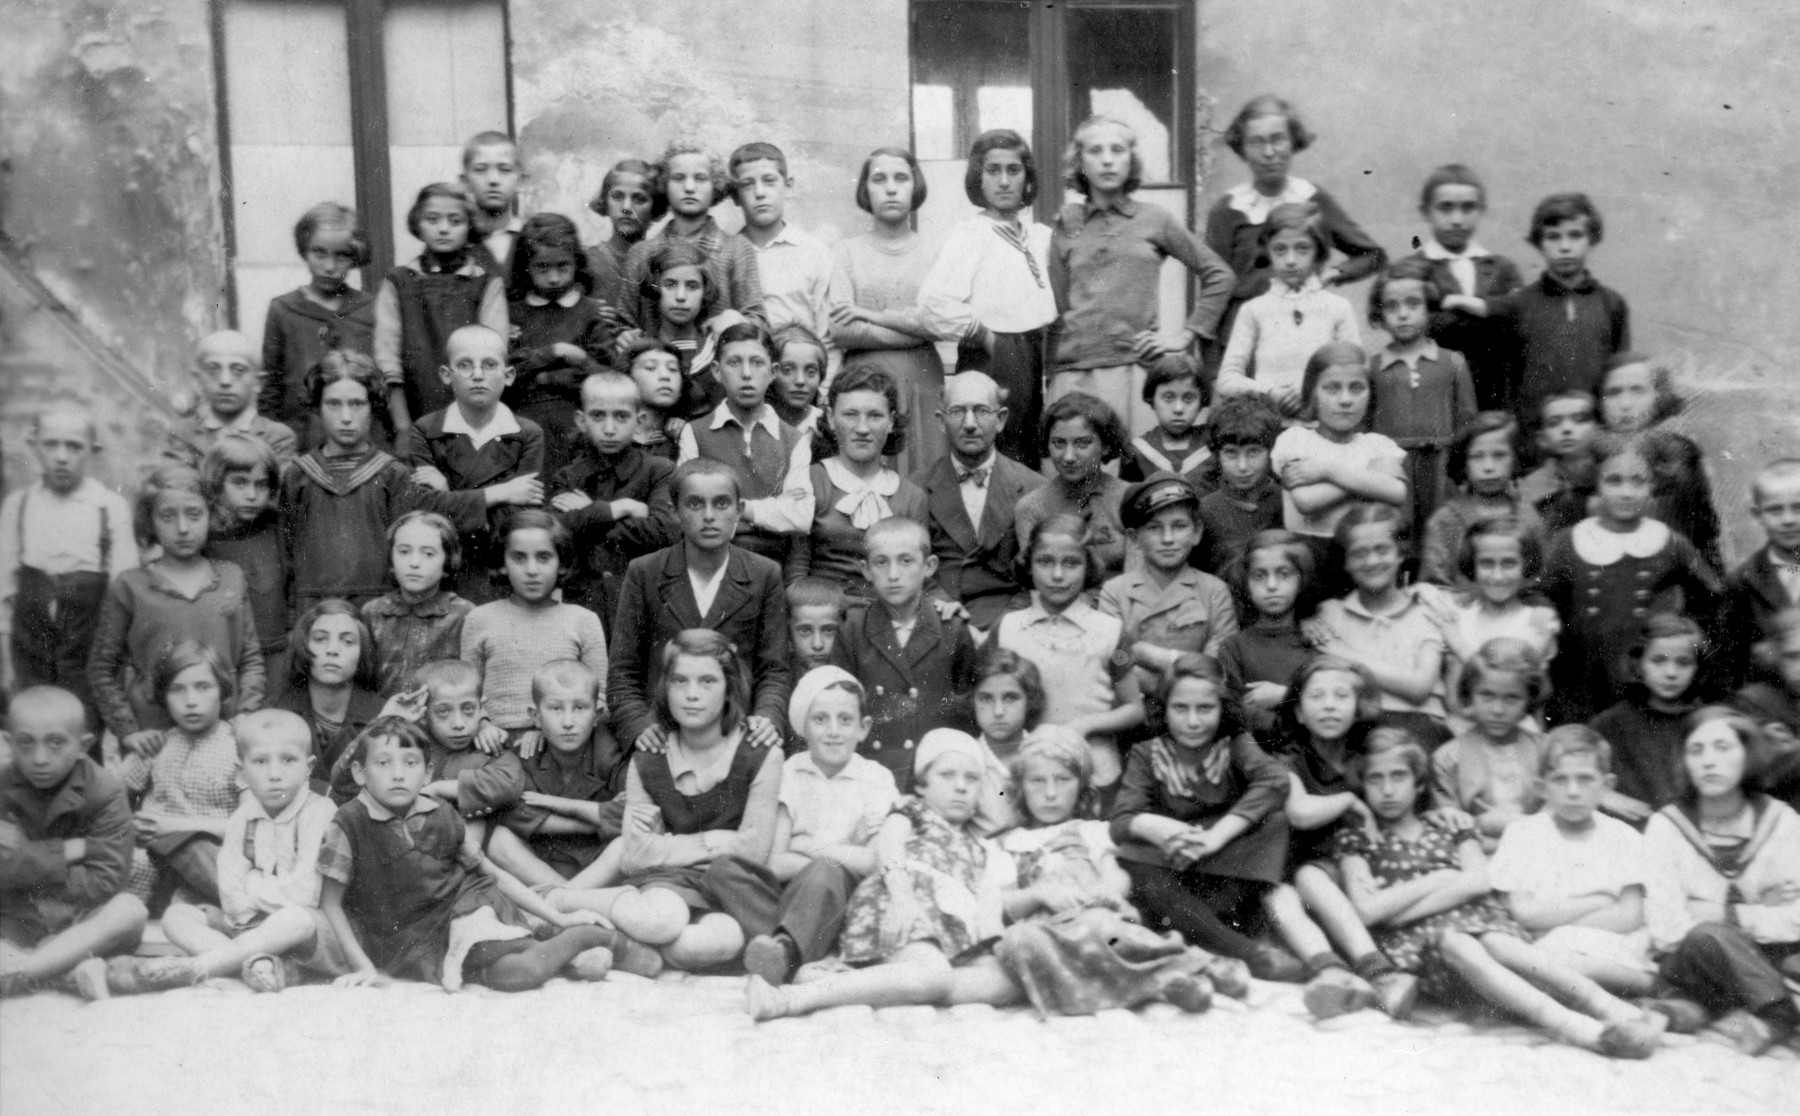 Group portrait of children at a summer day camp in Bedzin.  

Among those pictured is Abram Szyjewicz (first row, center, wearing a light shirt and beret) and his sister Laja (not identified).